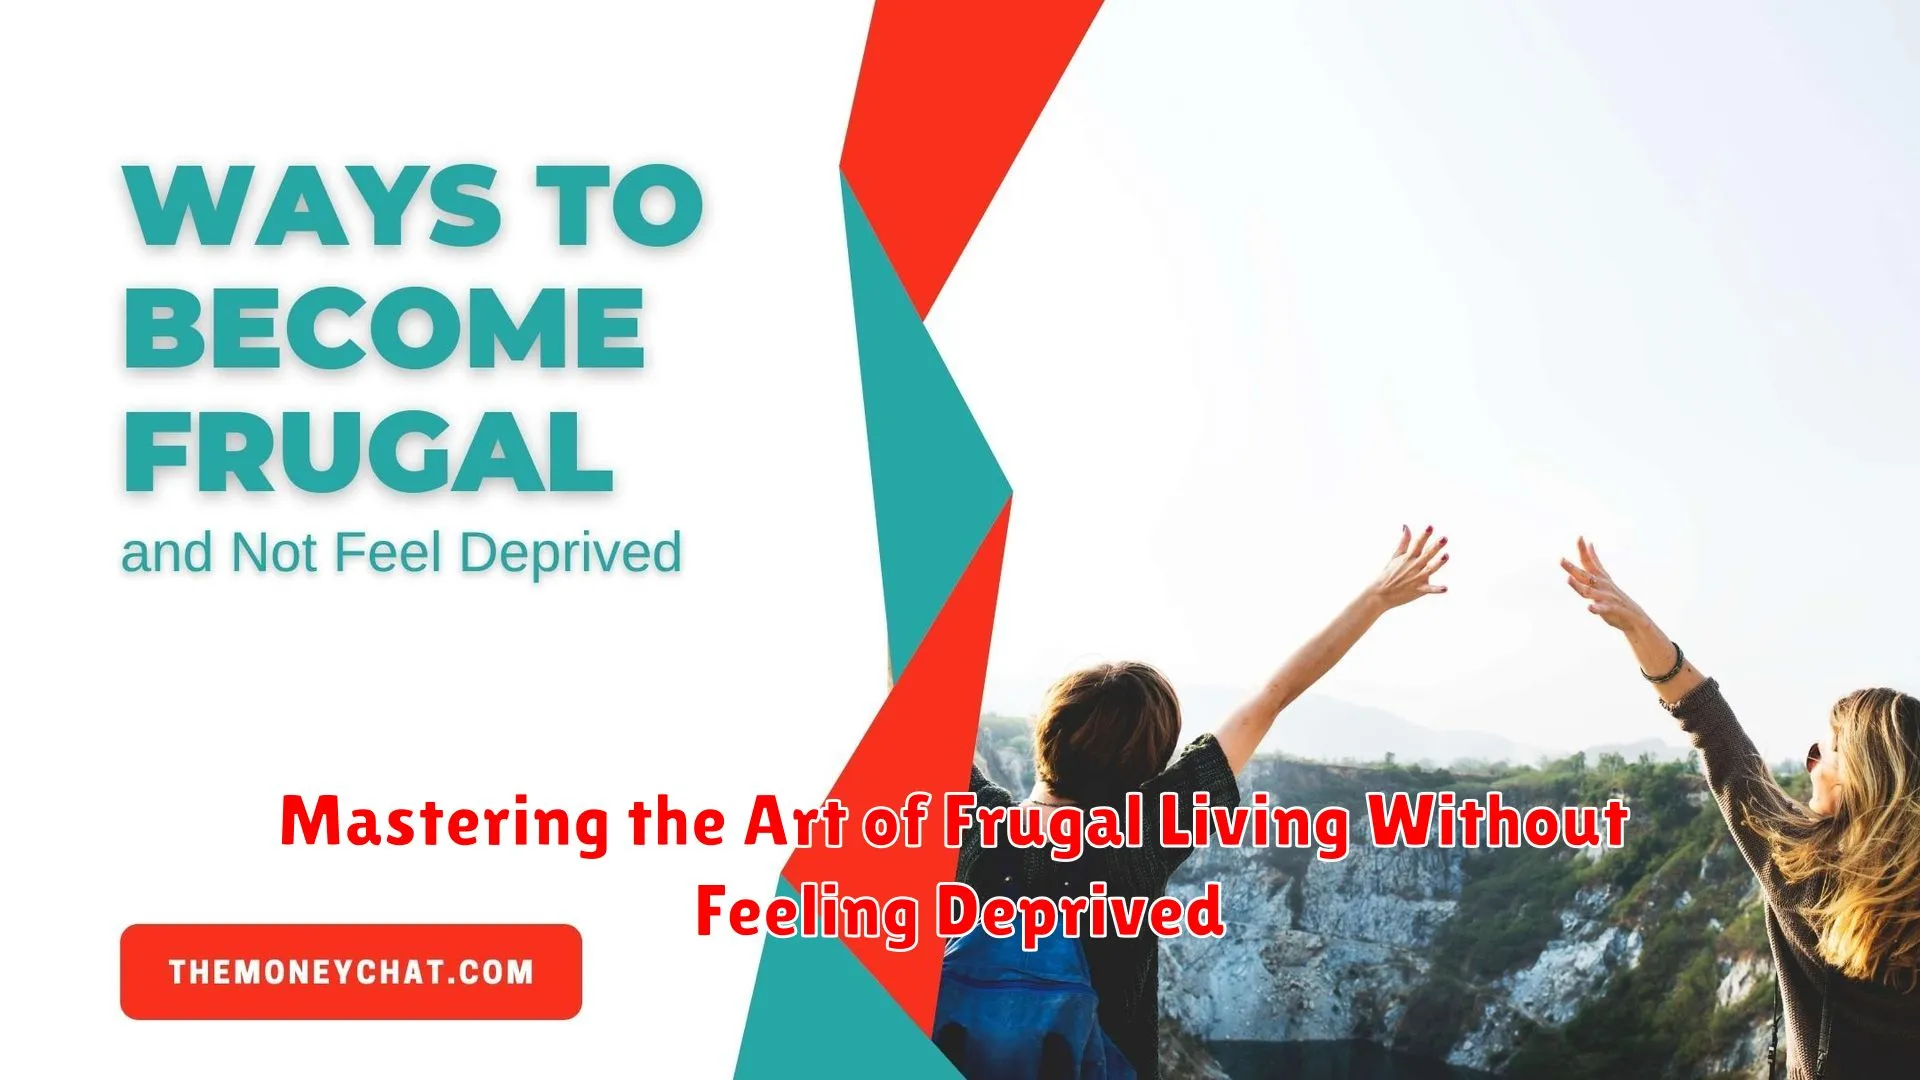 Mastering the Art of Frugal Living Without Feeling Deprived